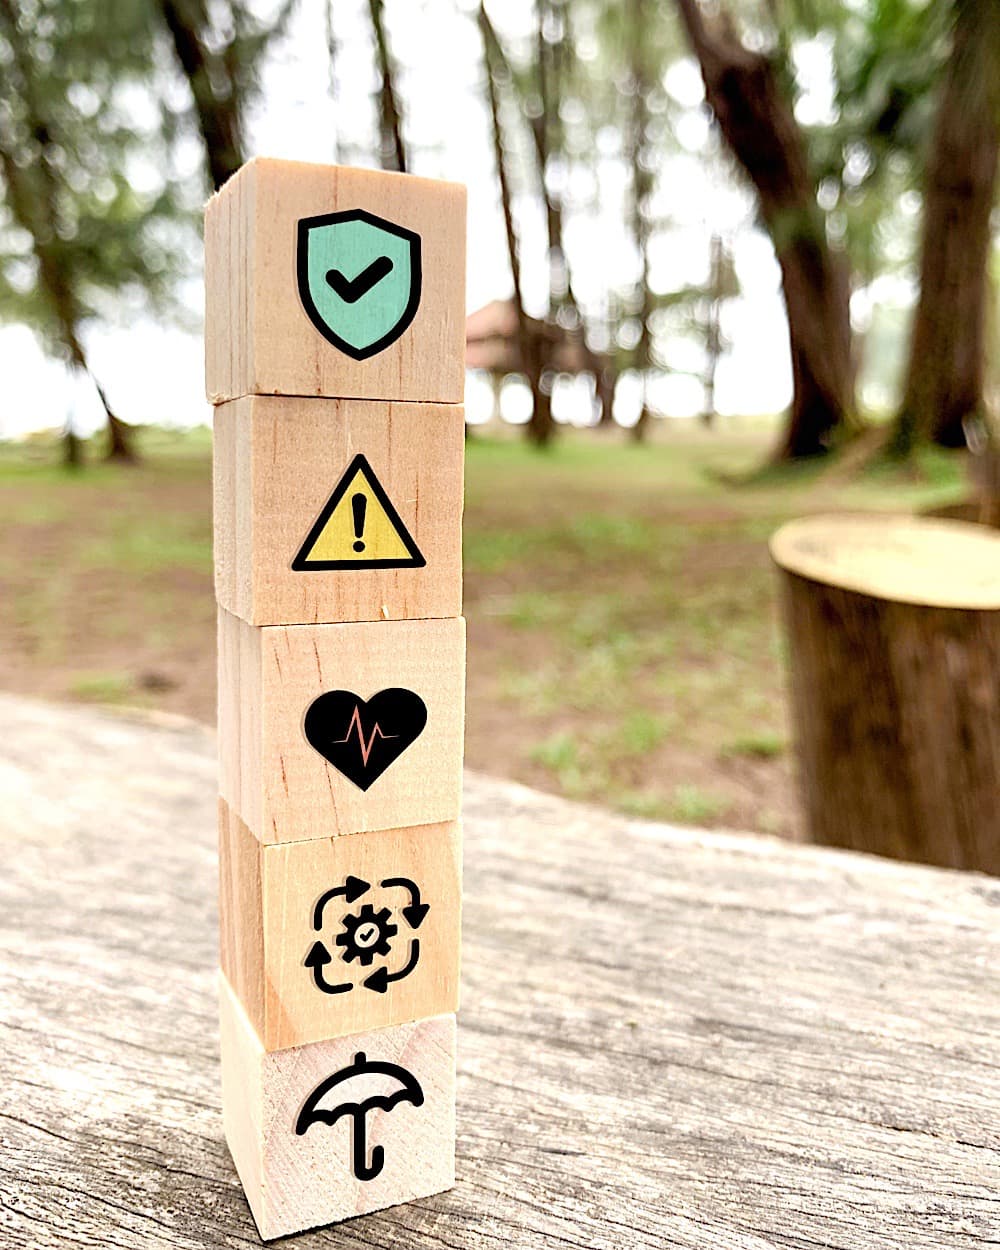 https://quvisolar.com/wp-content/uploads/2023/09/wooden-cube-with-work-safety-icon-the-concept-of-2022-10-18-00-07-46-utc.jpg